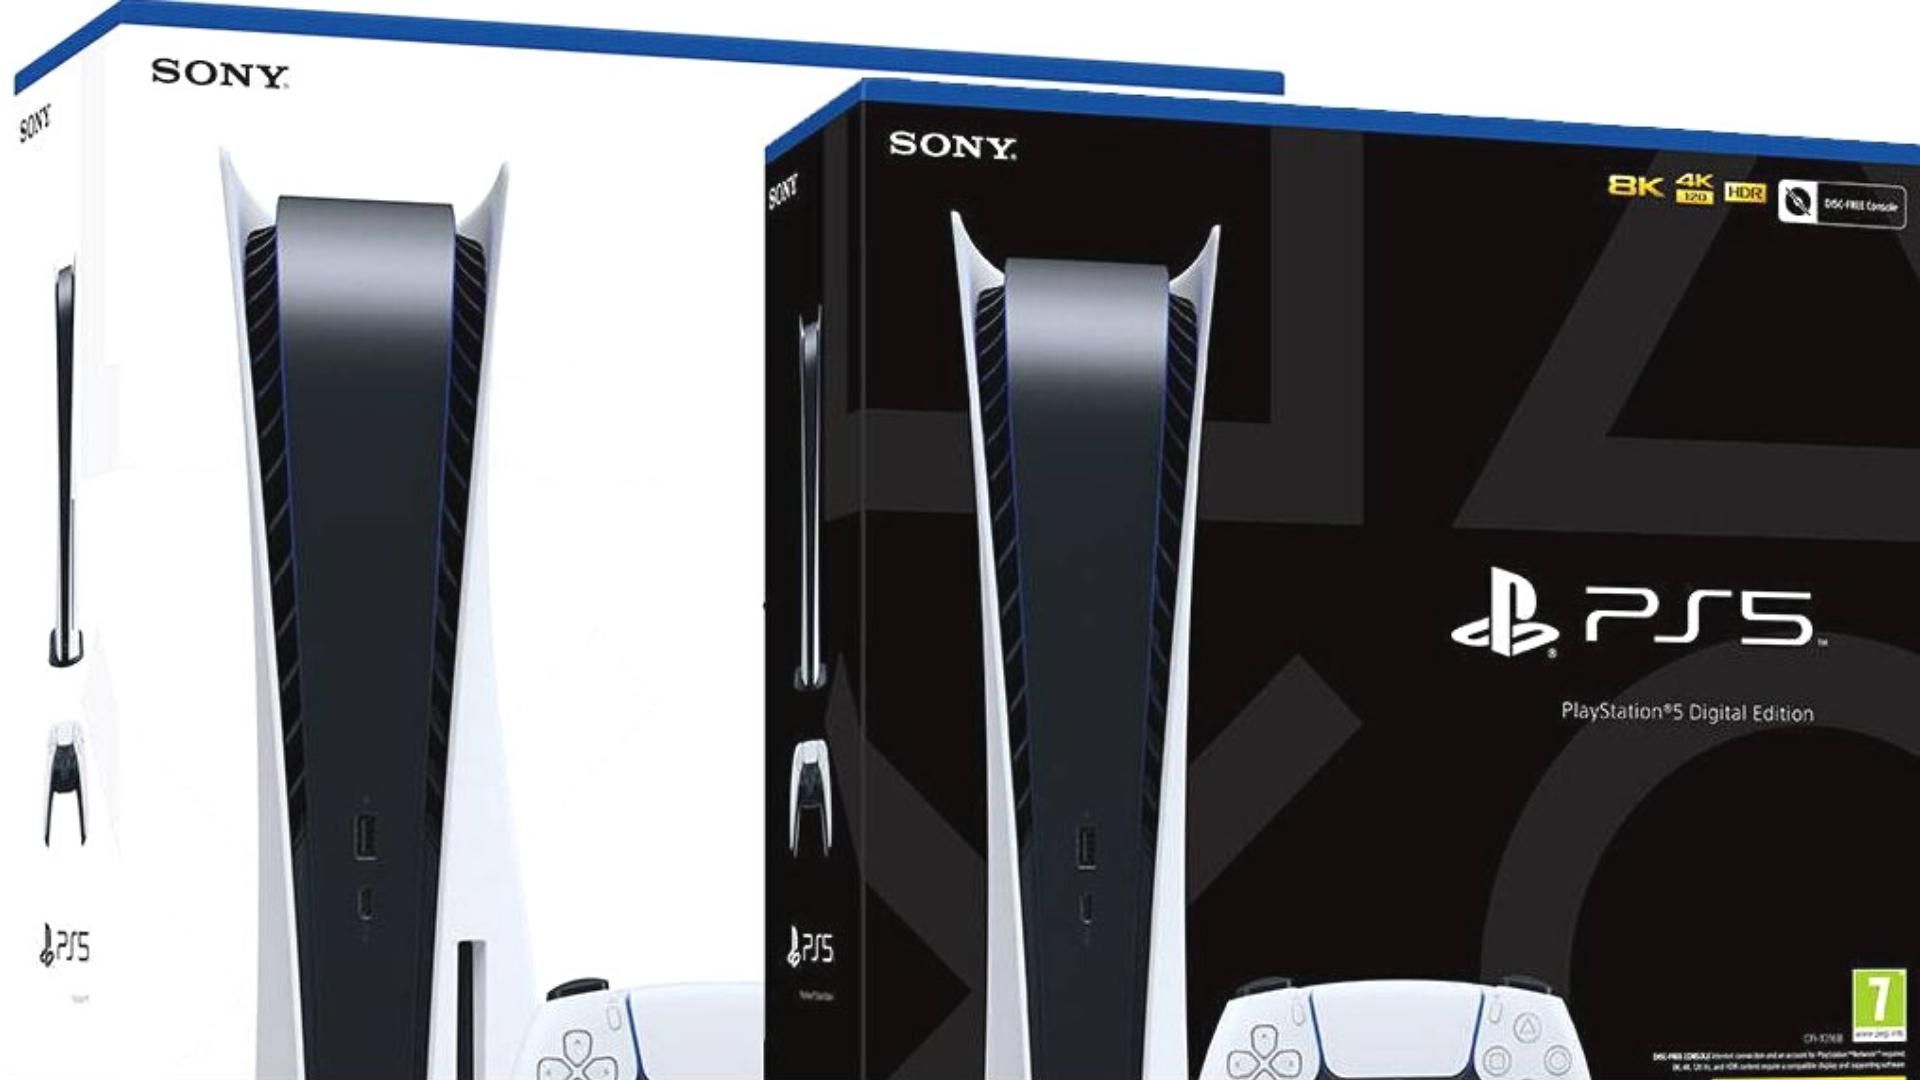 Sony adds holographic sticker to its consoles to deter PS5 scalpers